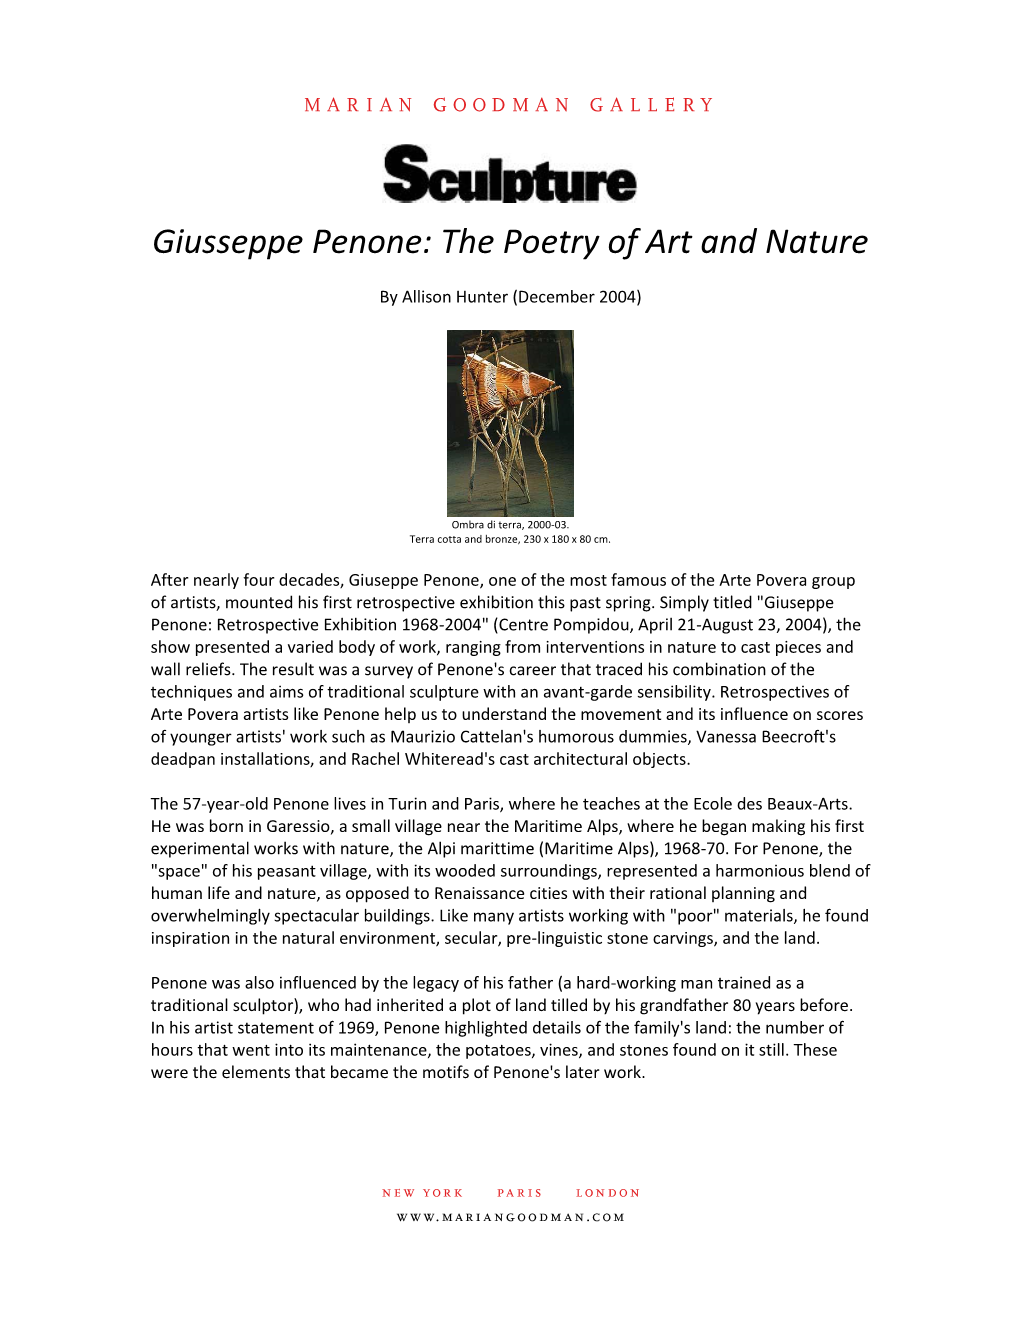 Press Giusseppe Penone: the Poetry of Art and Nature Sculpture